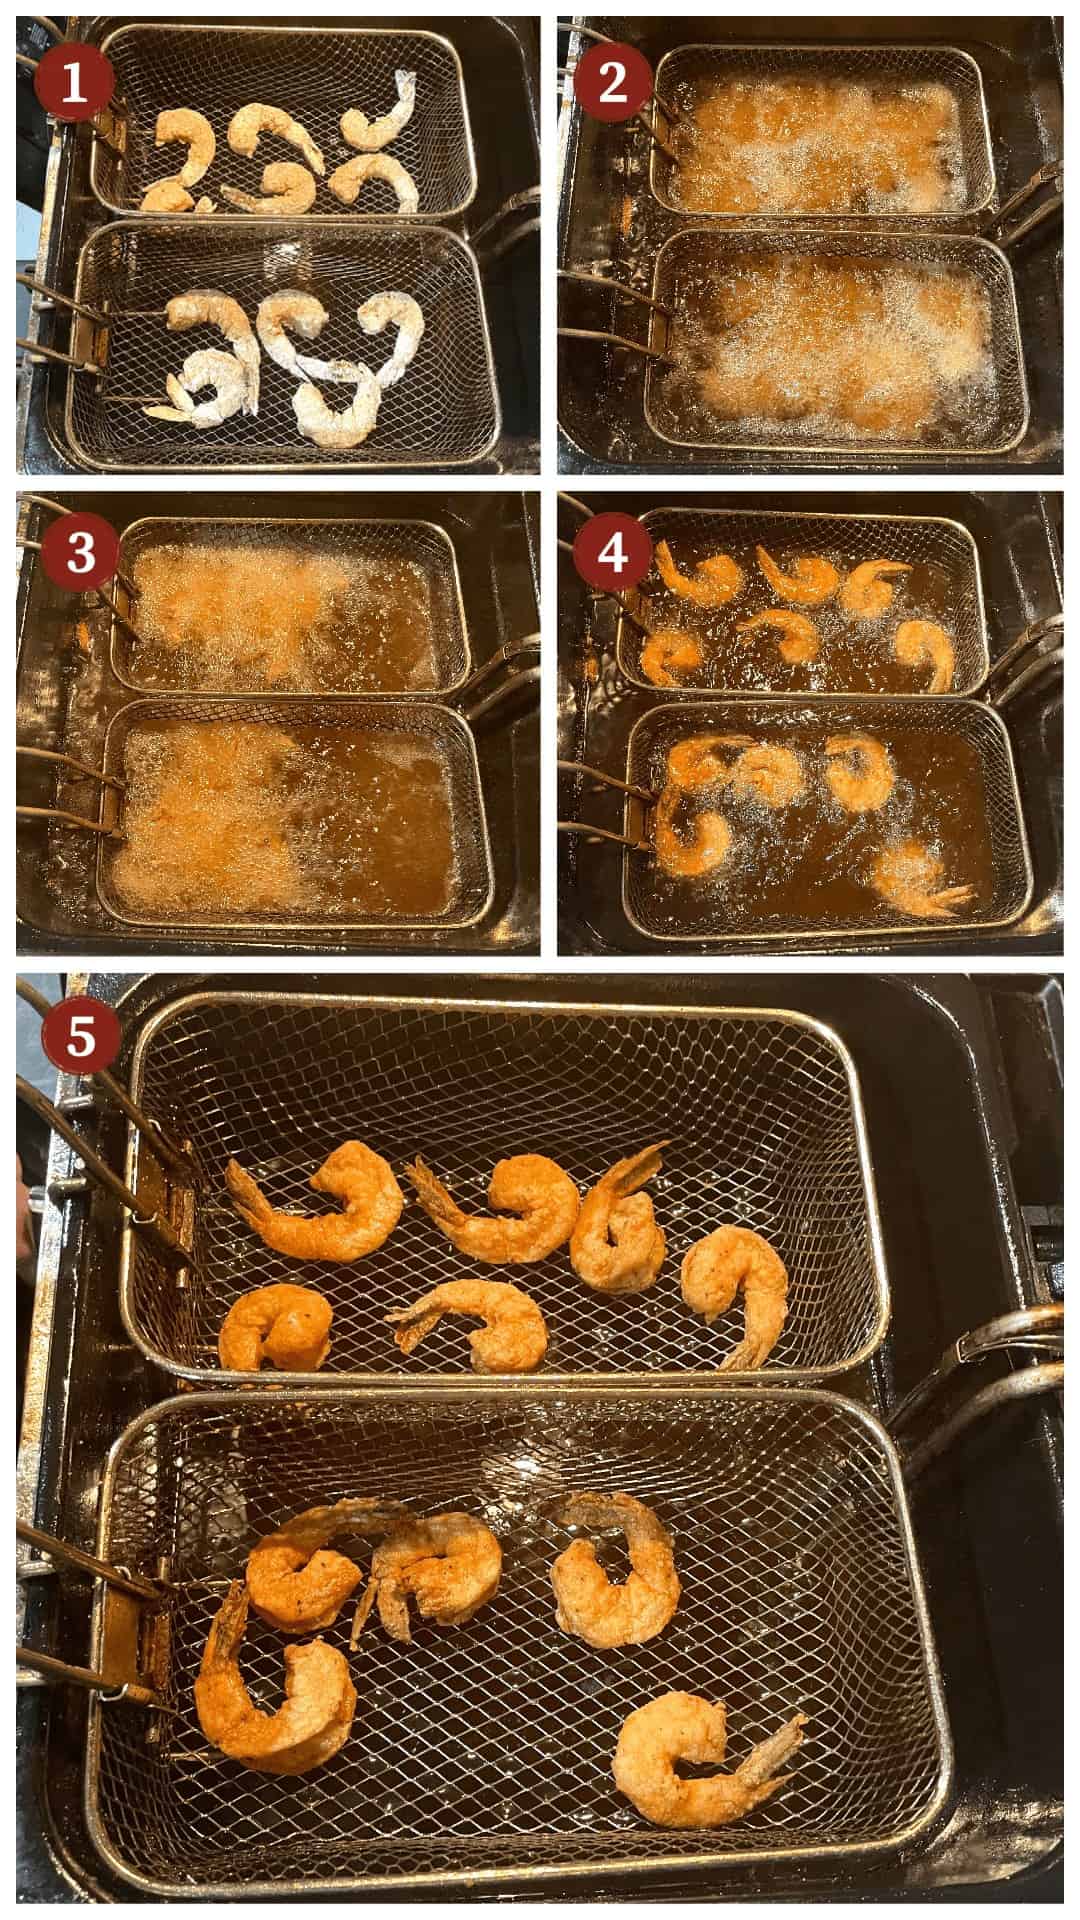 A collage of images showing how to deep fry shrimp, steps 1-5.